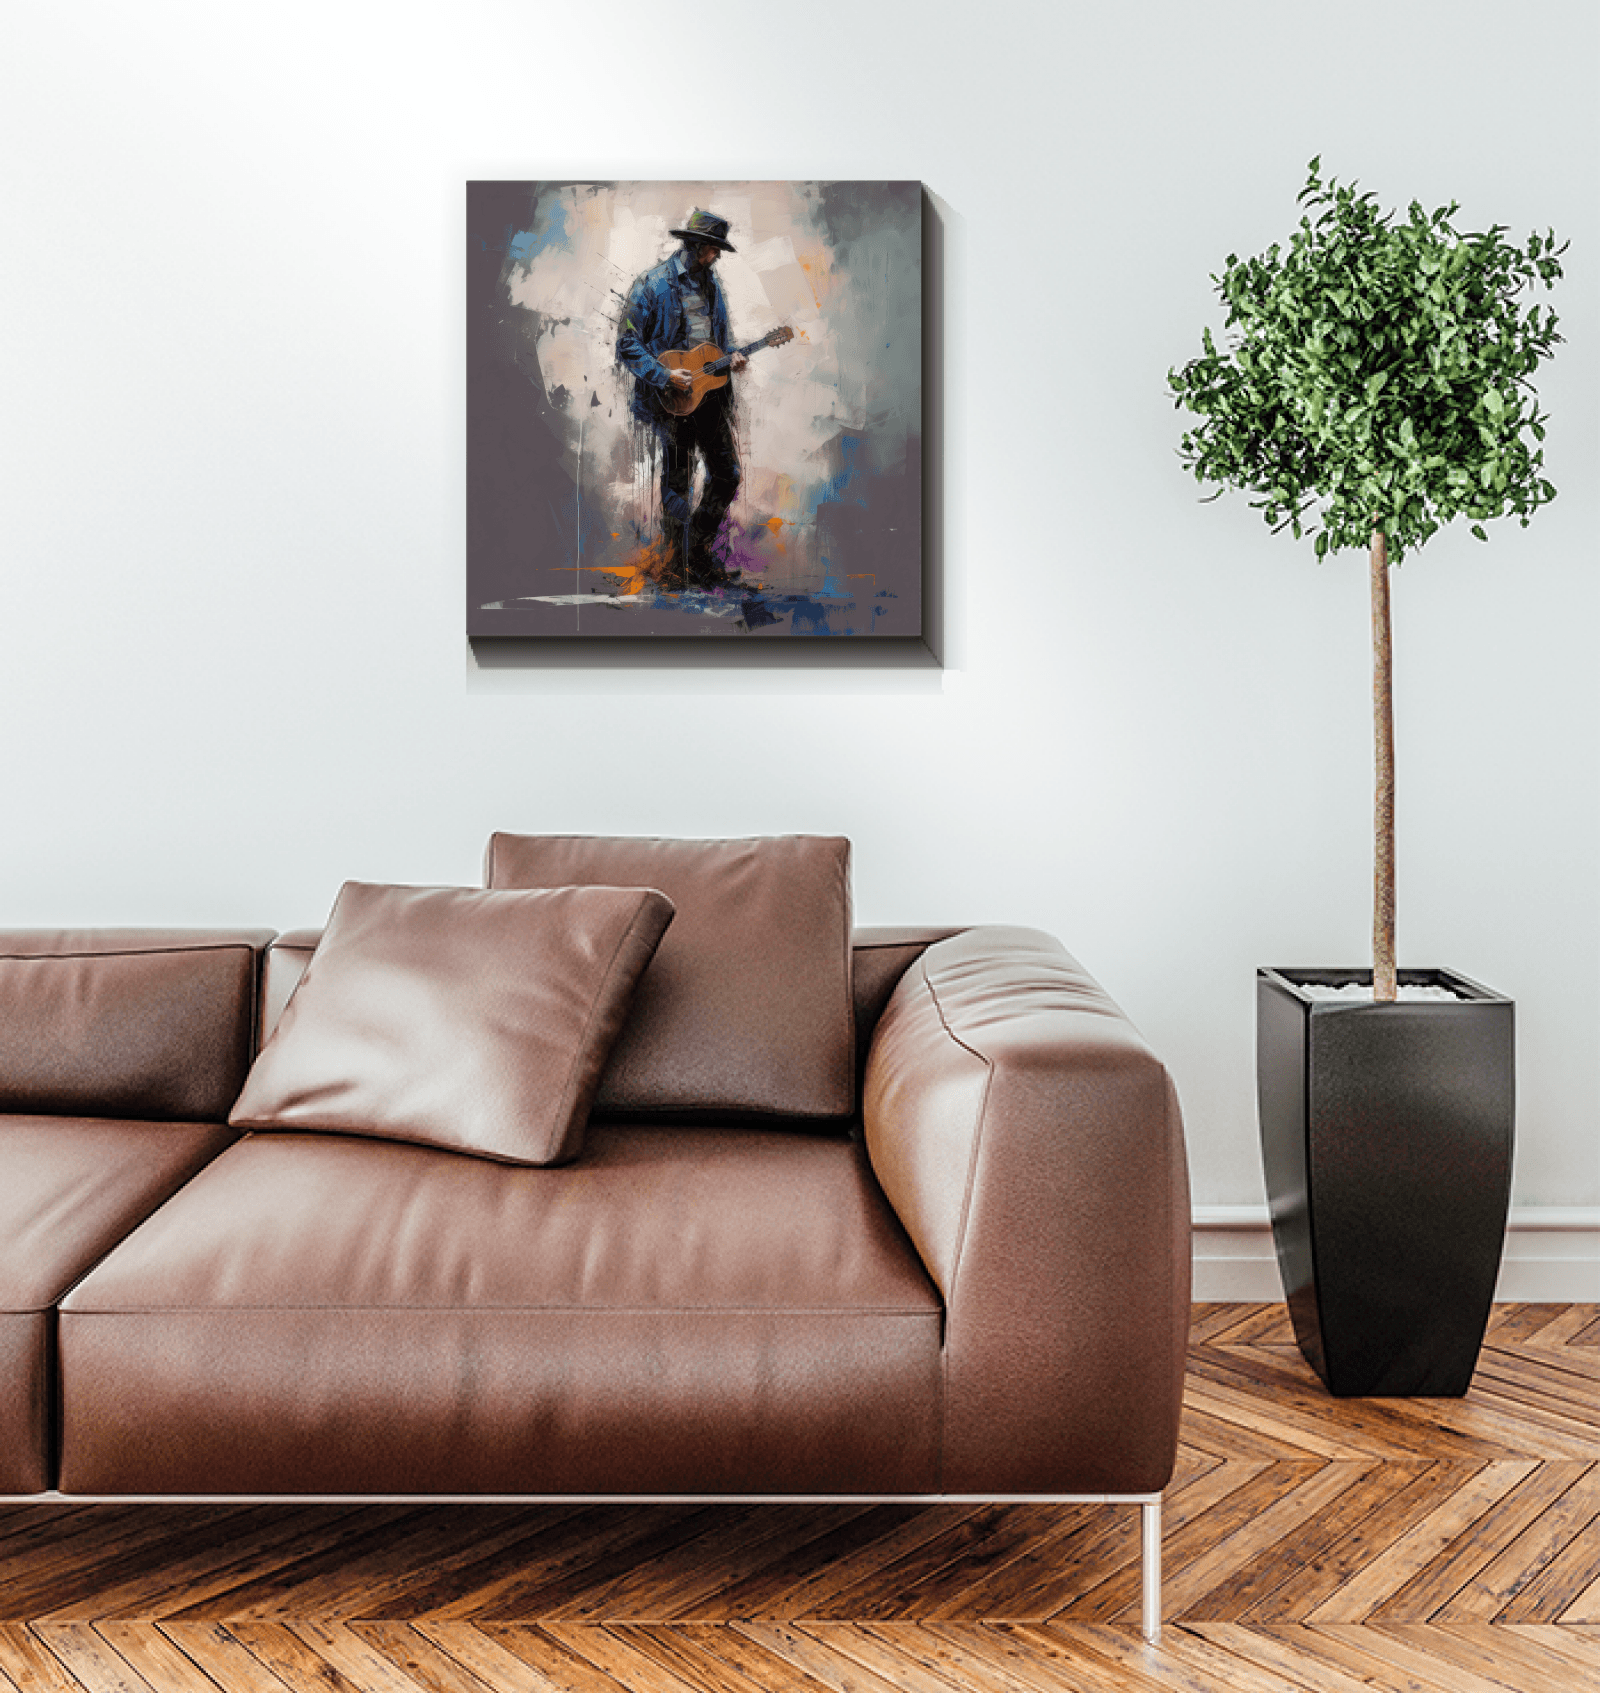 Fingerstyle guitar art on canvas bringing musical atmosphere to your space